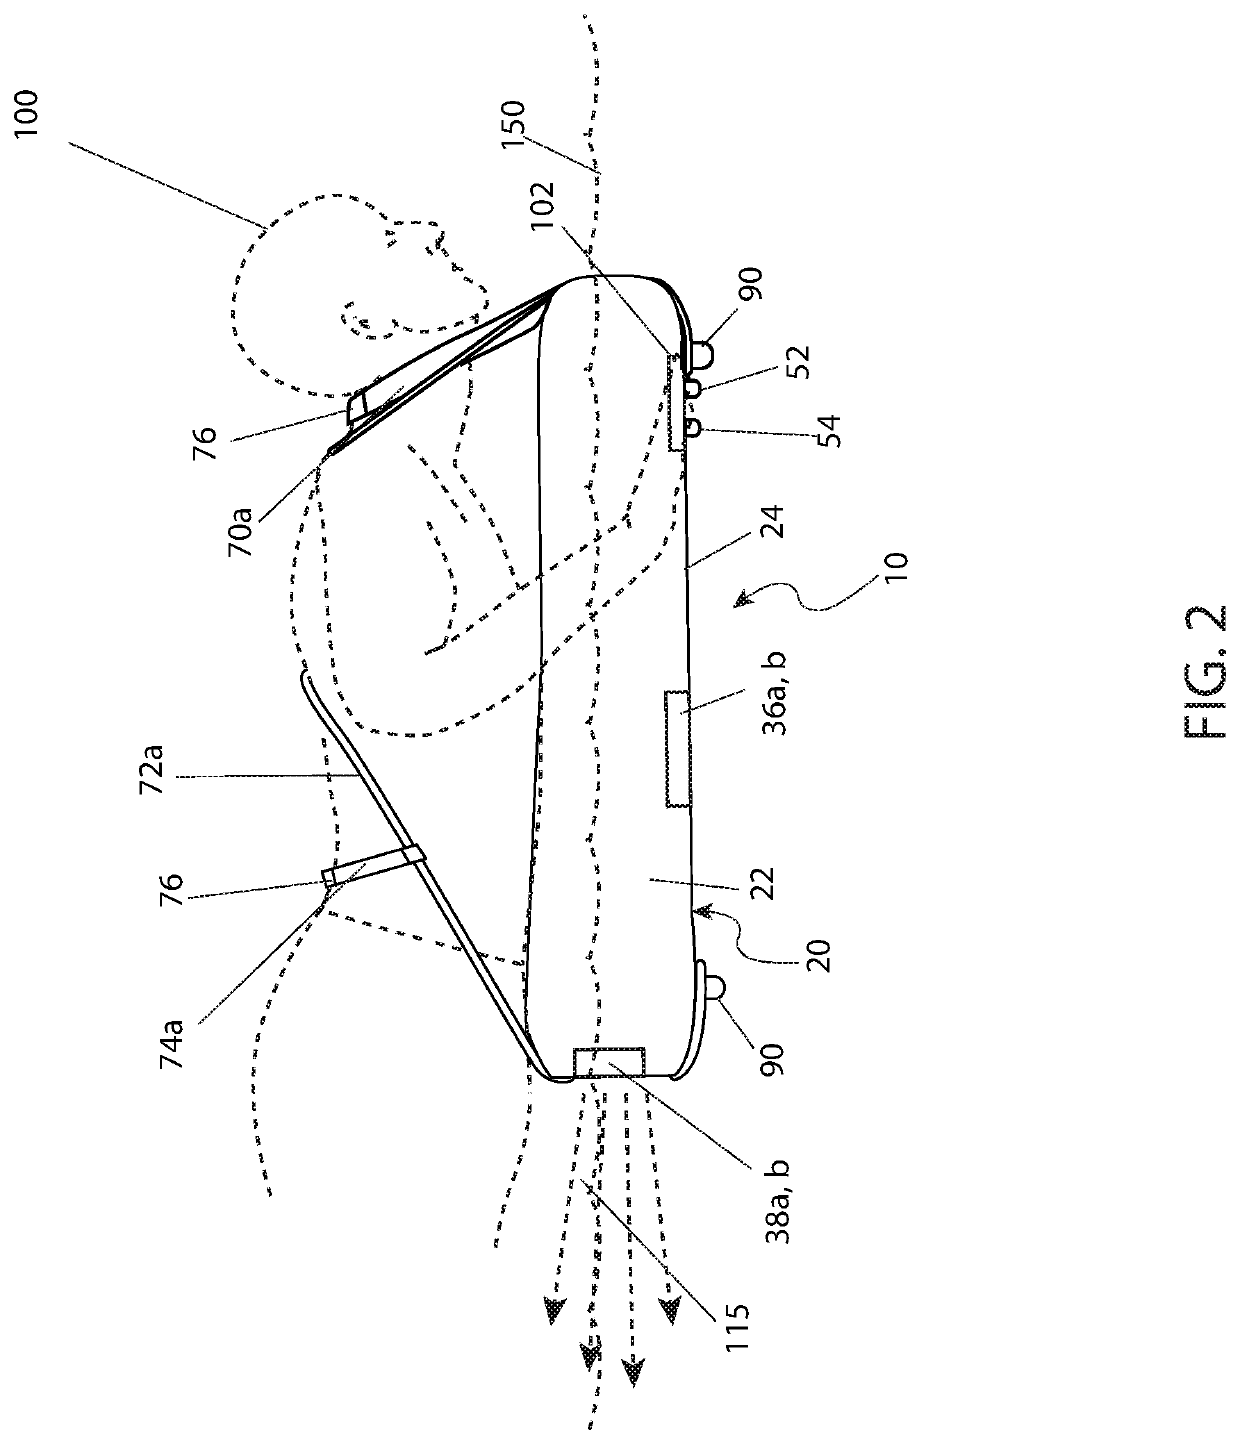 Self-propelled personal flotation device